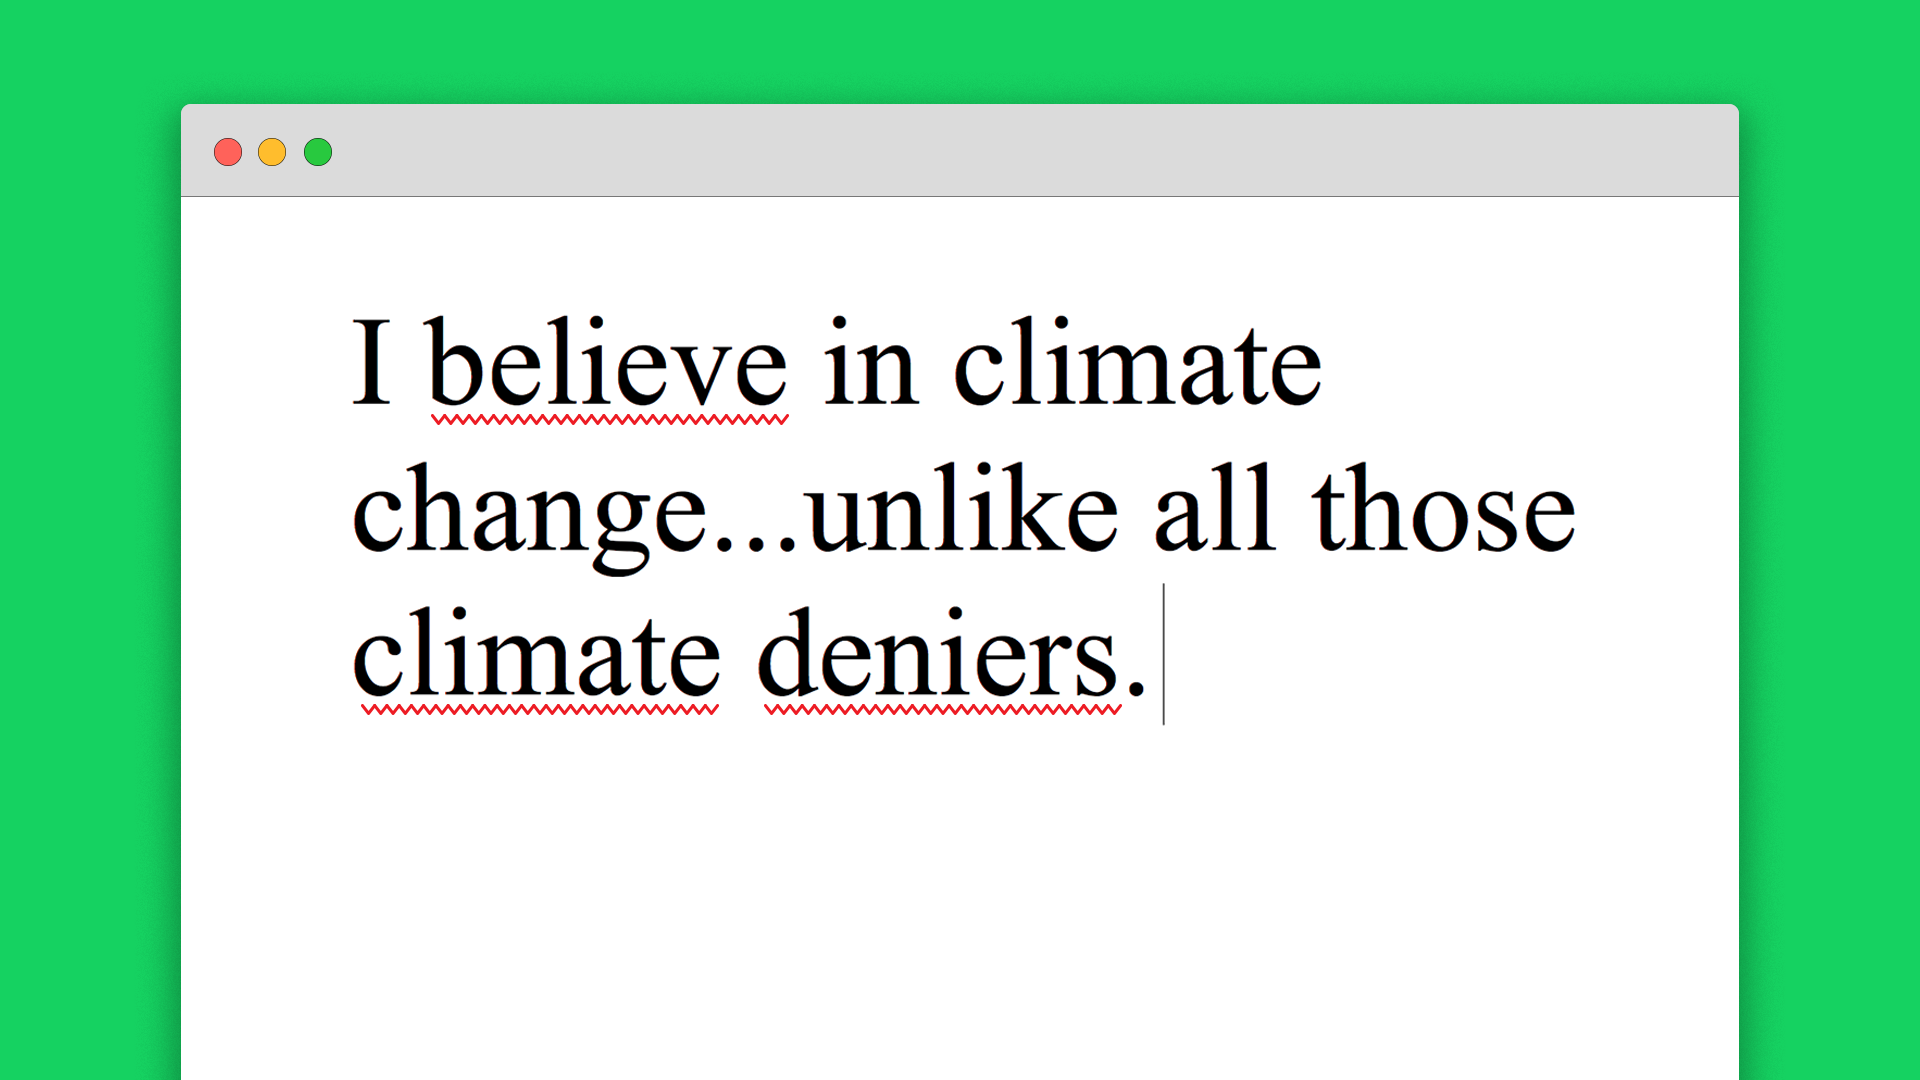 In this illustration, text in a word note reads: "I believe in climate change, unlike all those climate deniers."